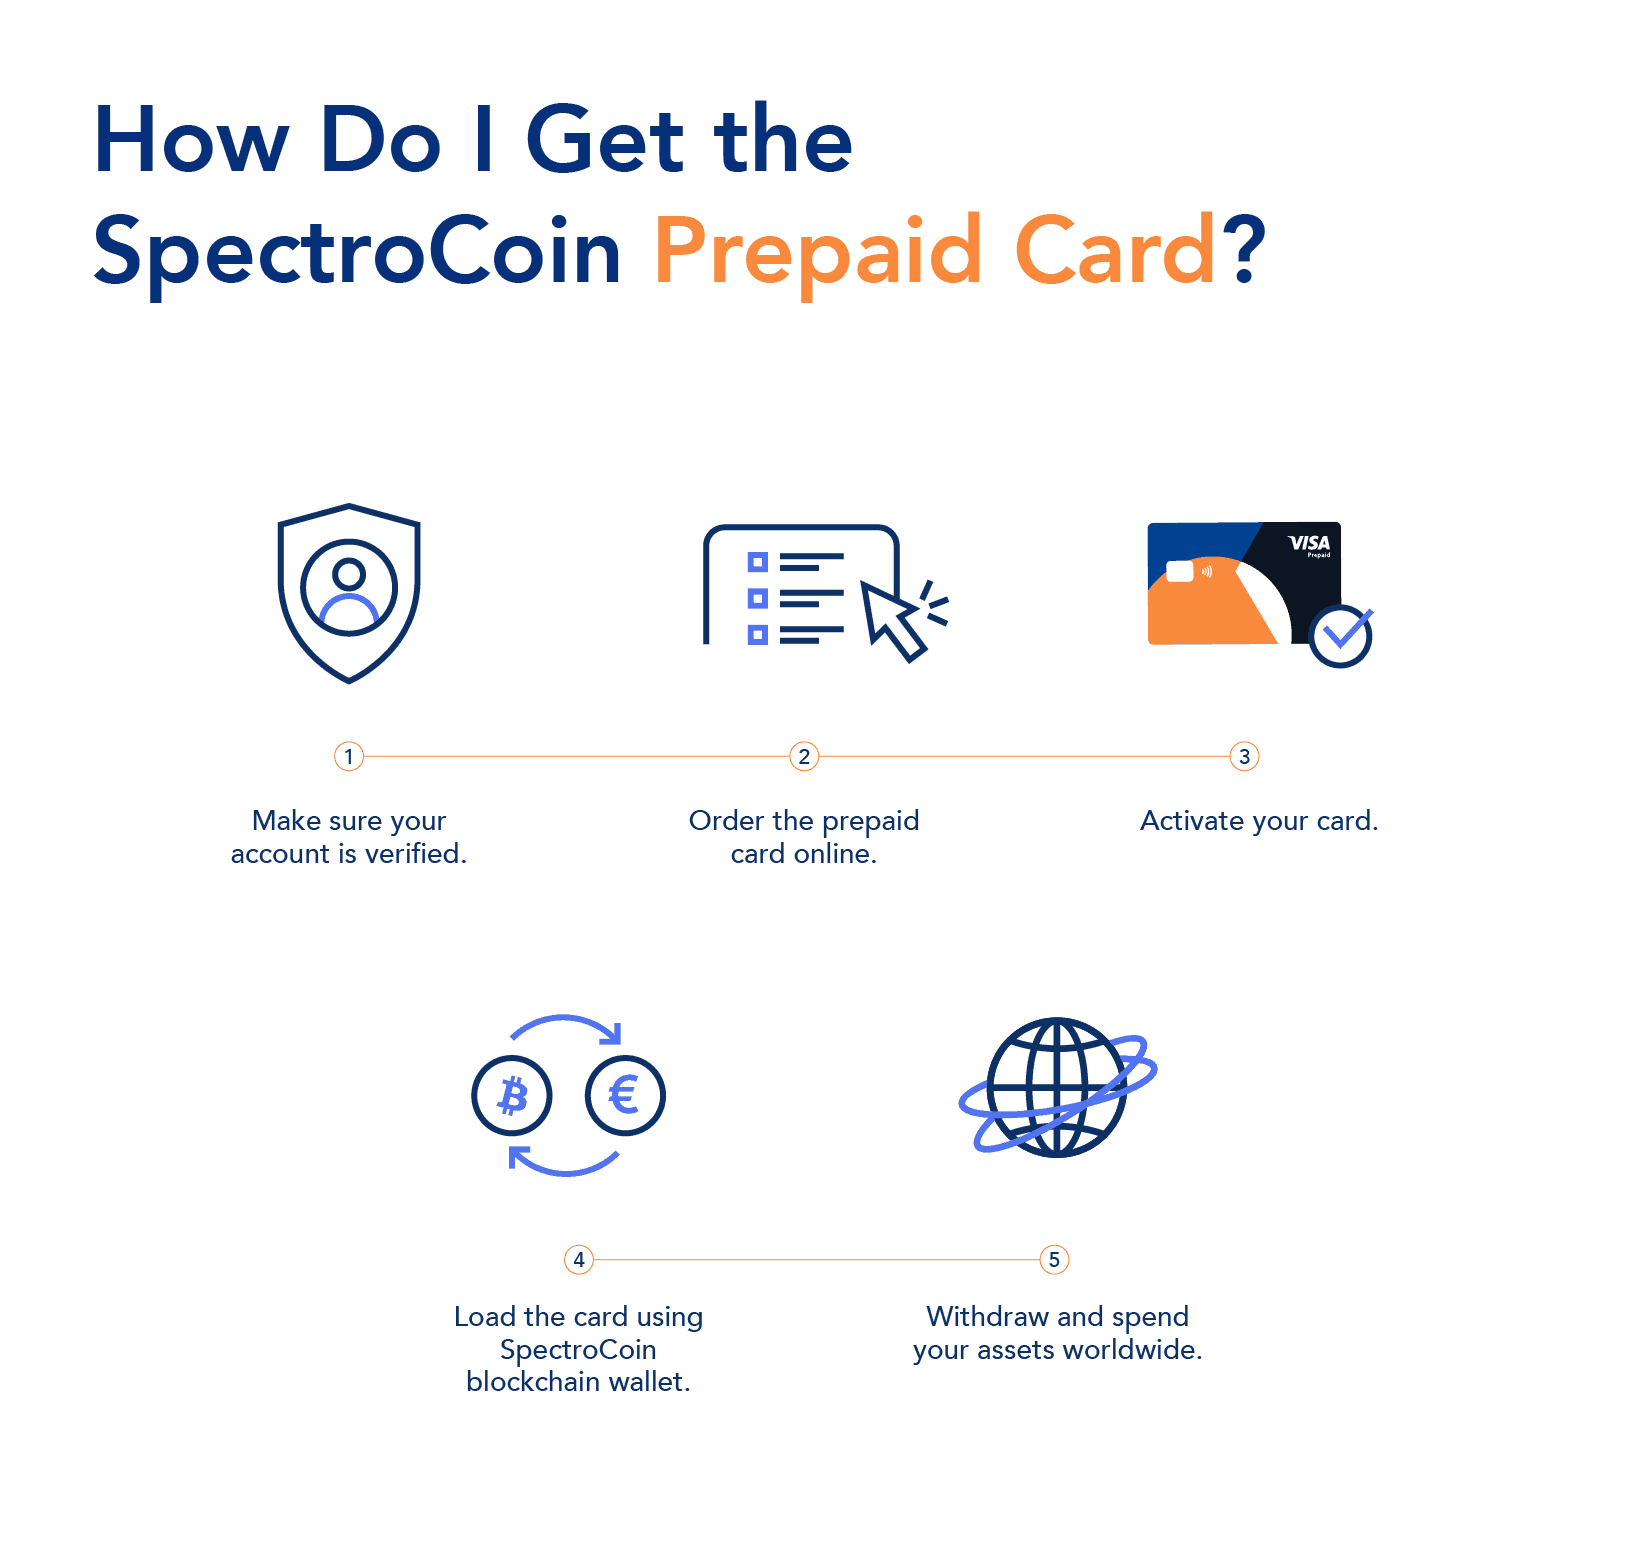 Infographic with 5 steps on how to get SpectroCoin prepaid card